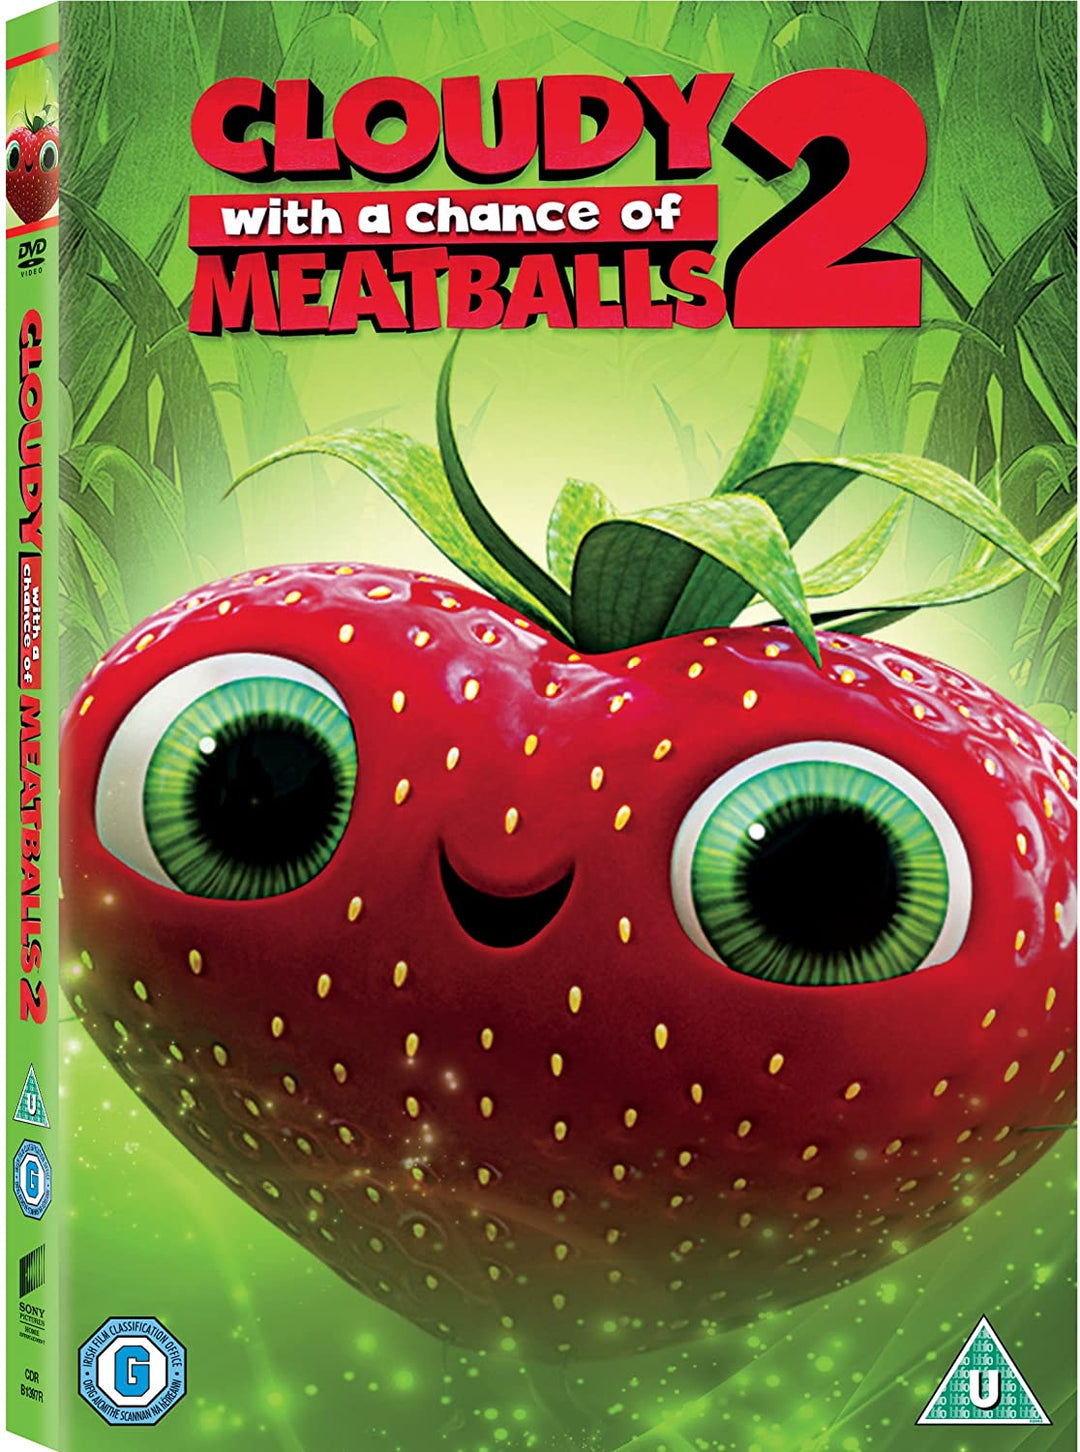 Cloudy With A Chance Of Meatballs 2 [2013] - Comedy [DVD]